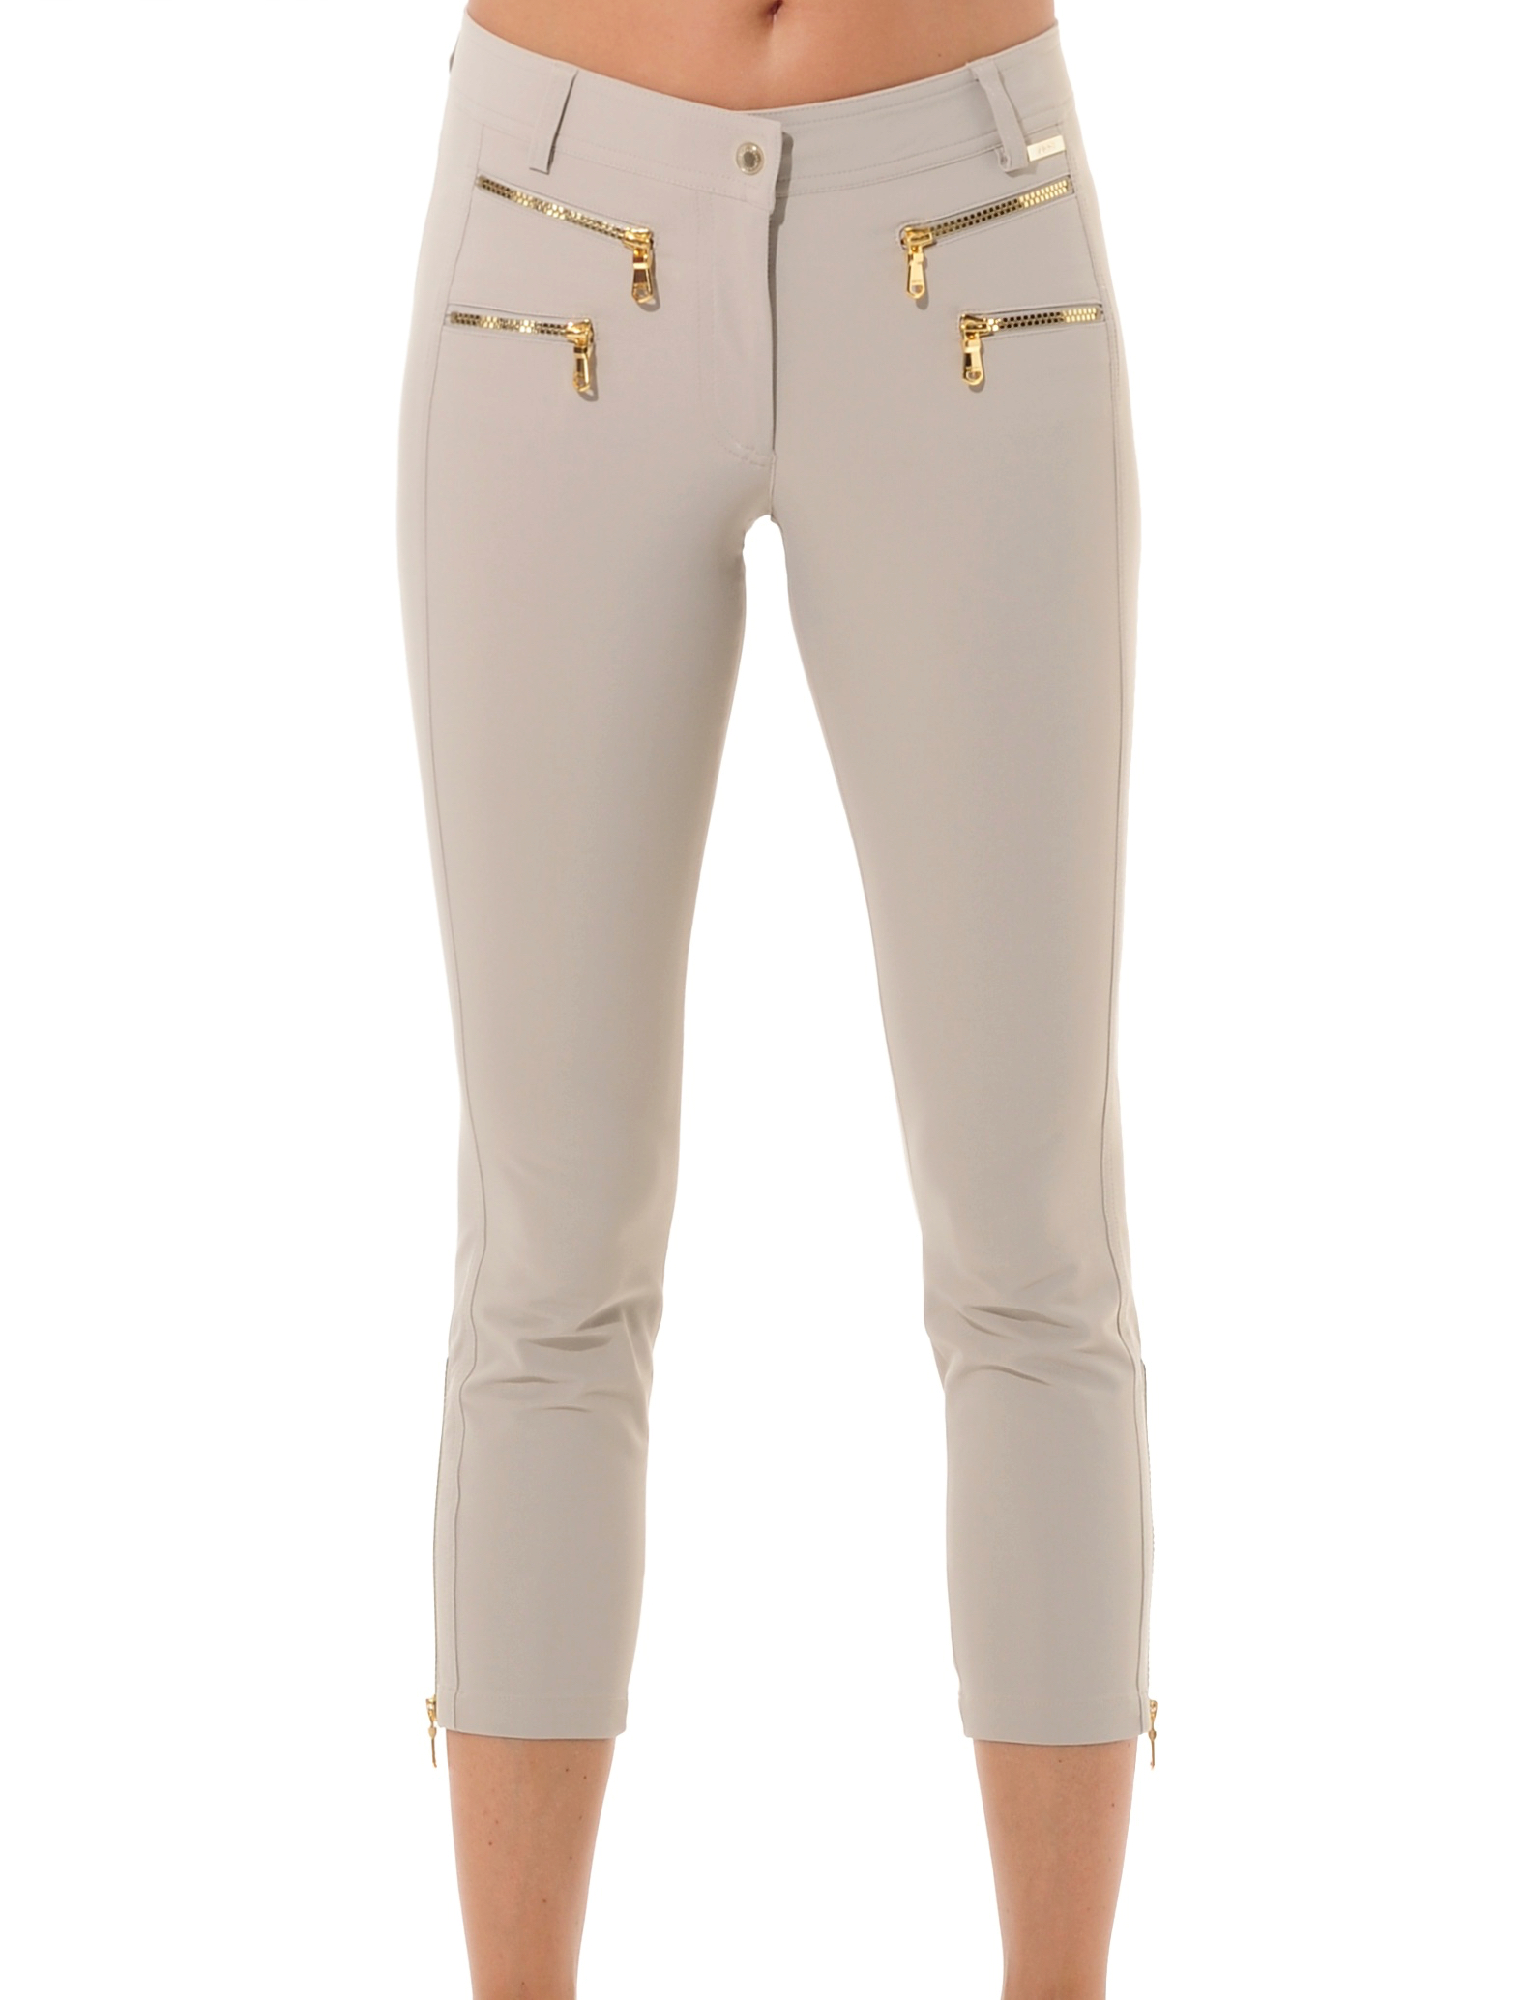 4way stretch shiny gold cube double zip cropped pants light taupe 